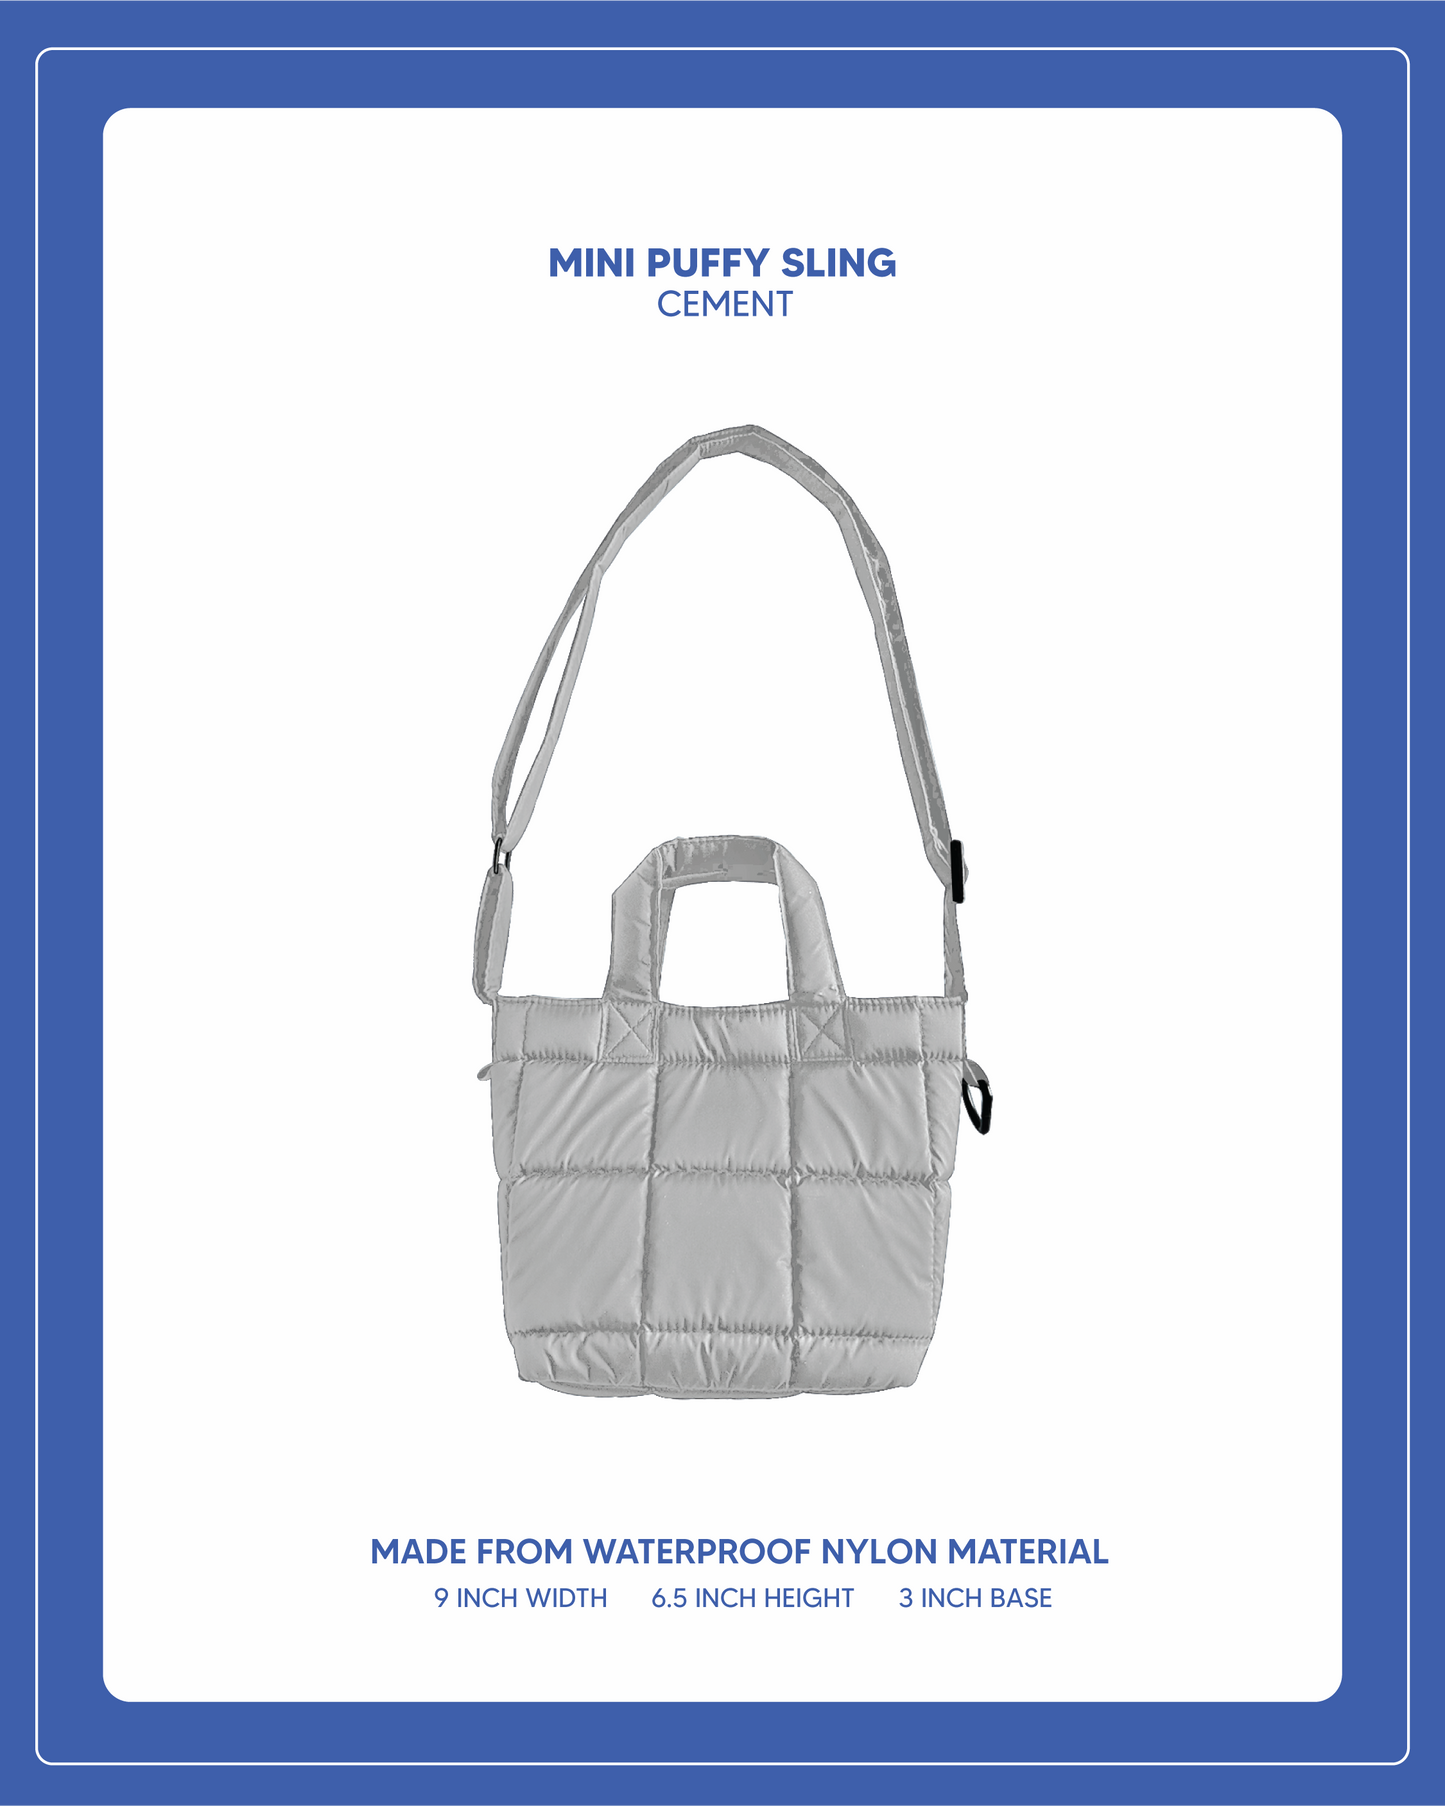 Mini Puffy Sling - Cement